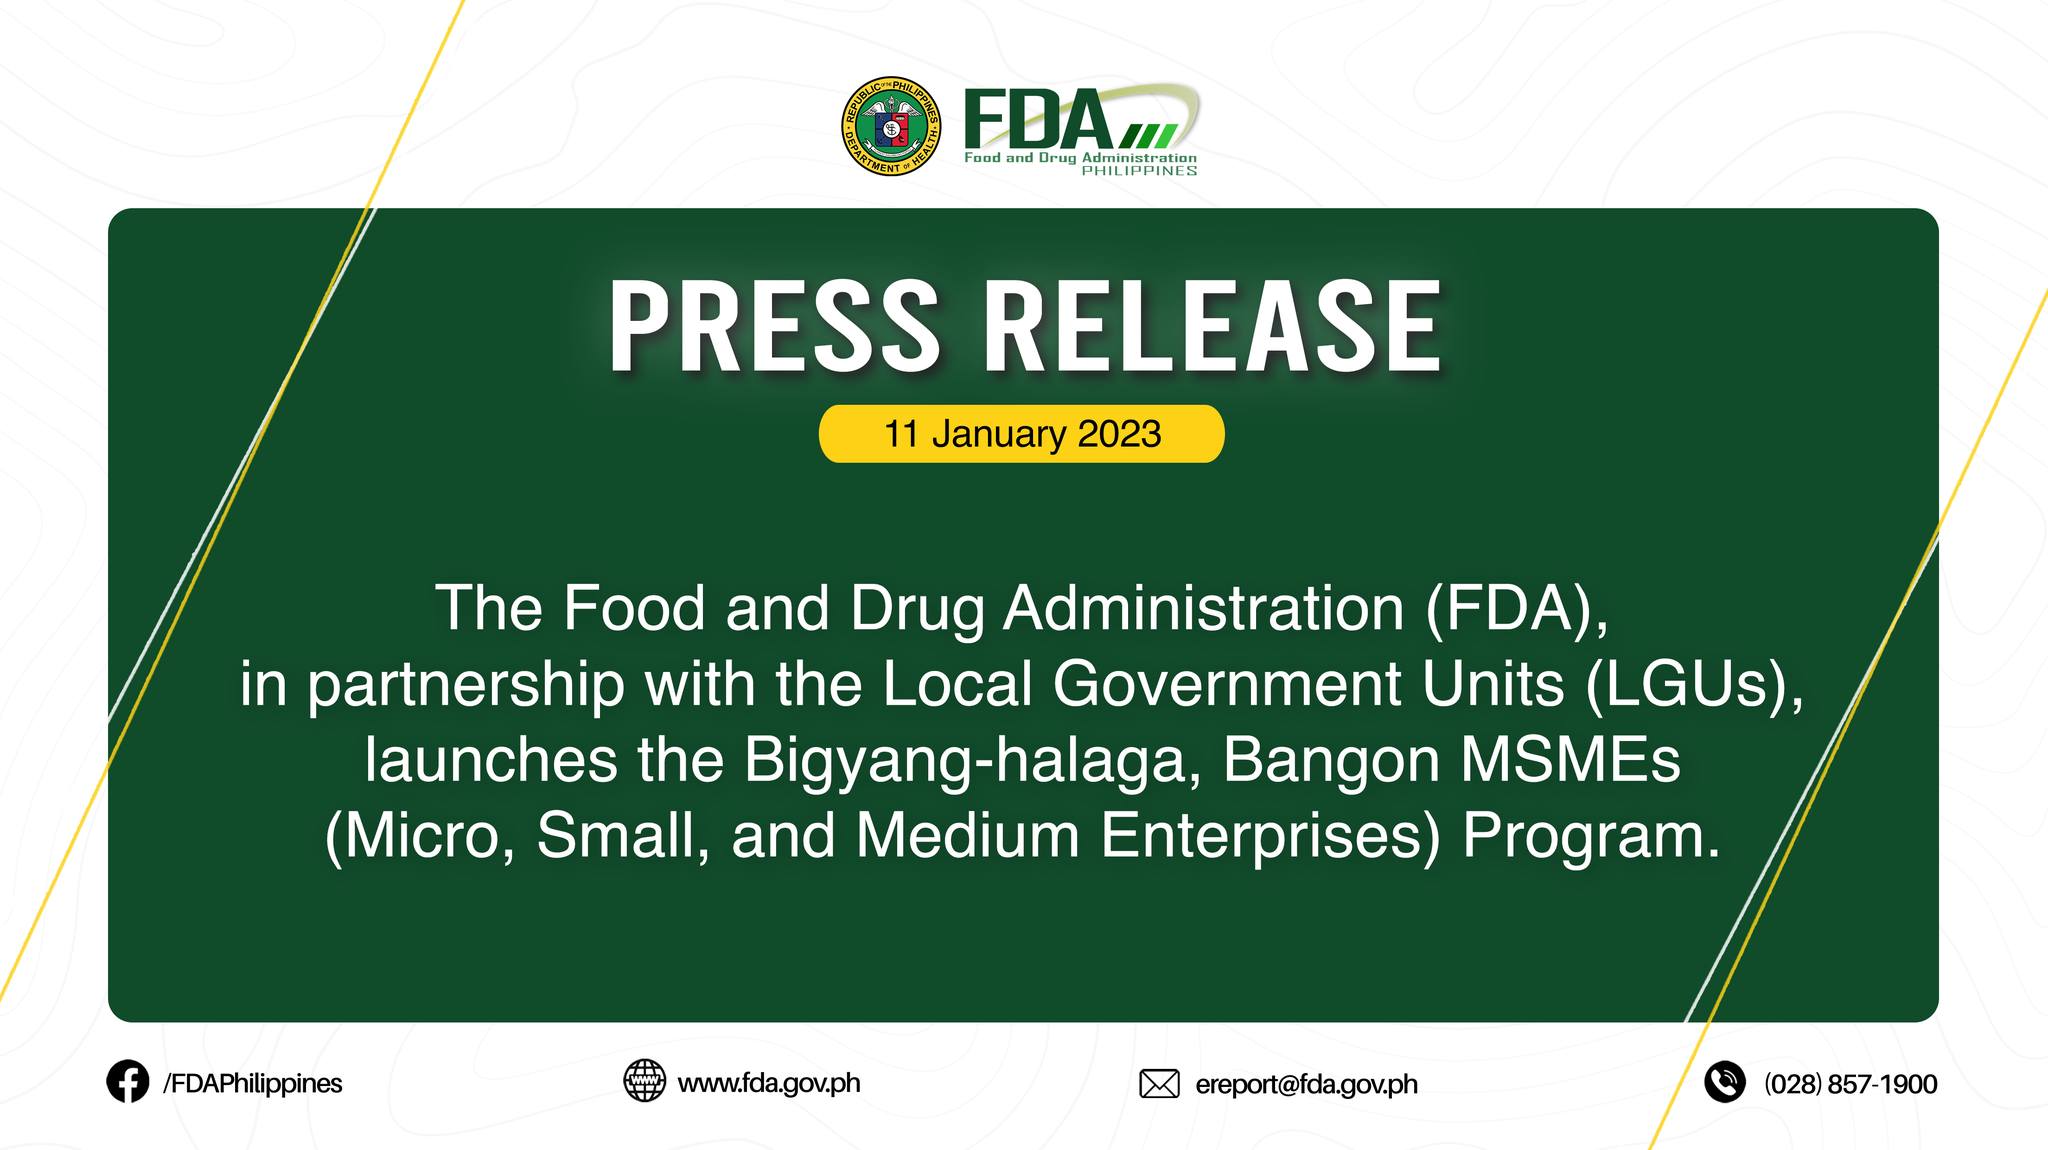 FDA Press Release || The Food and Drug Administration (FDA), in partnership with the Local Government Units (LGUs), launches the Bigyang-halaga, Bangon MSMEs (Micro, Small, and Medium Enterprises) Program.